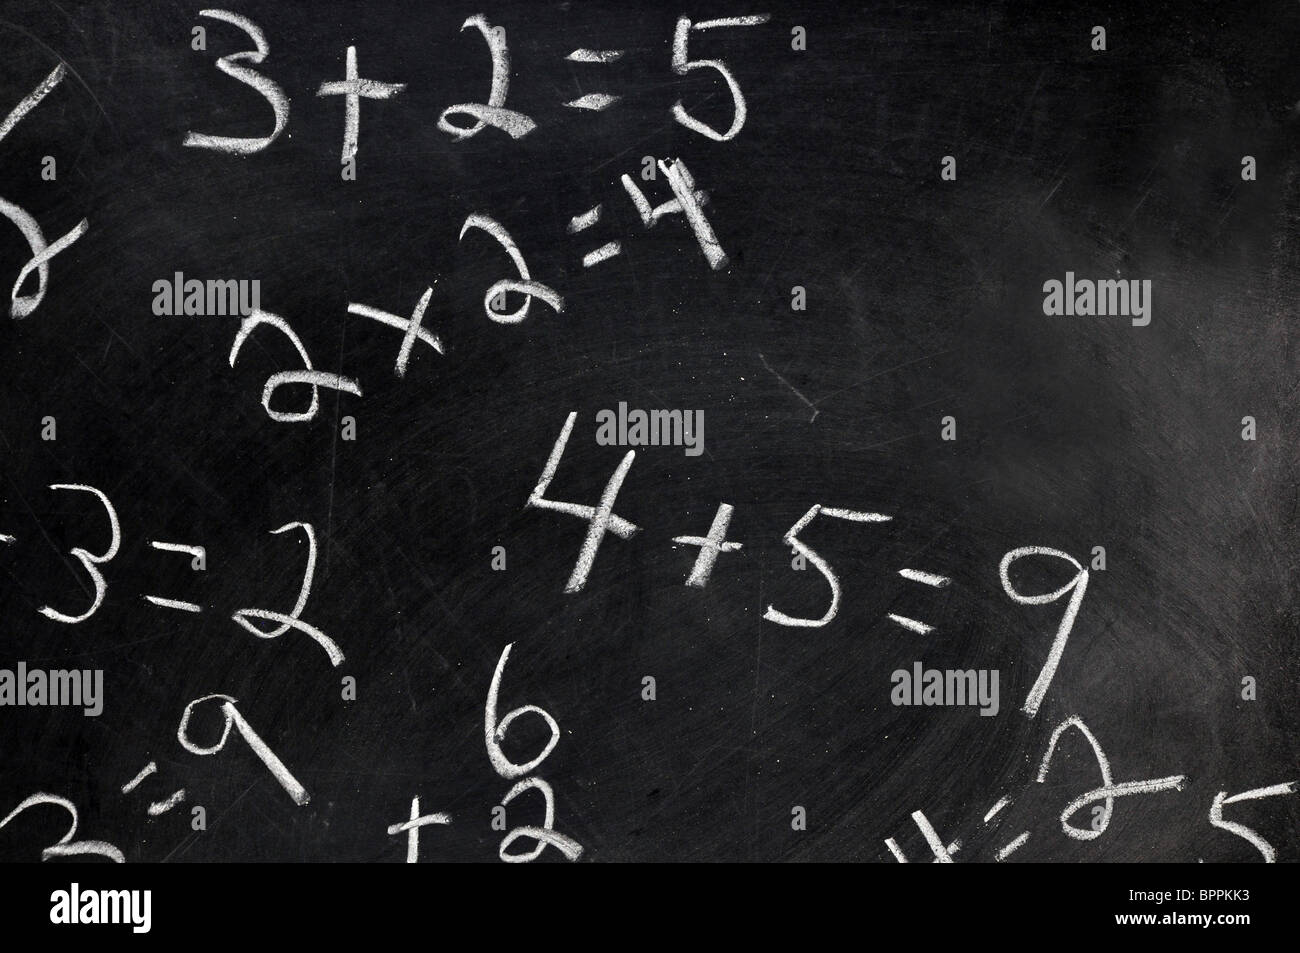 Equations on black chalkboard with copy space. Stock Photo